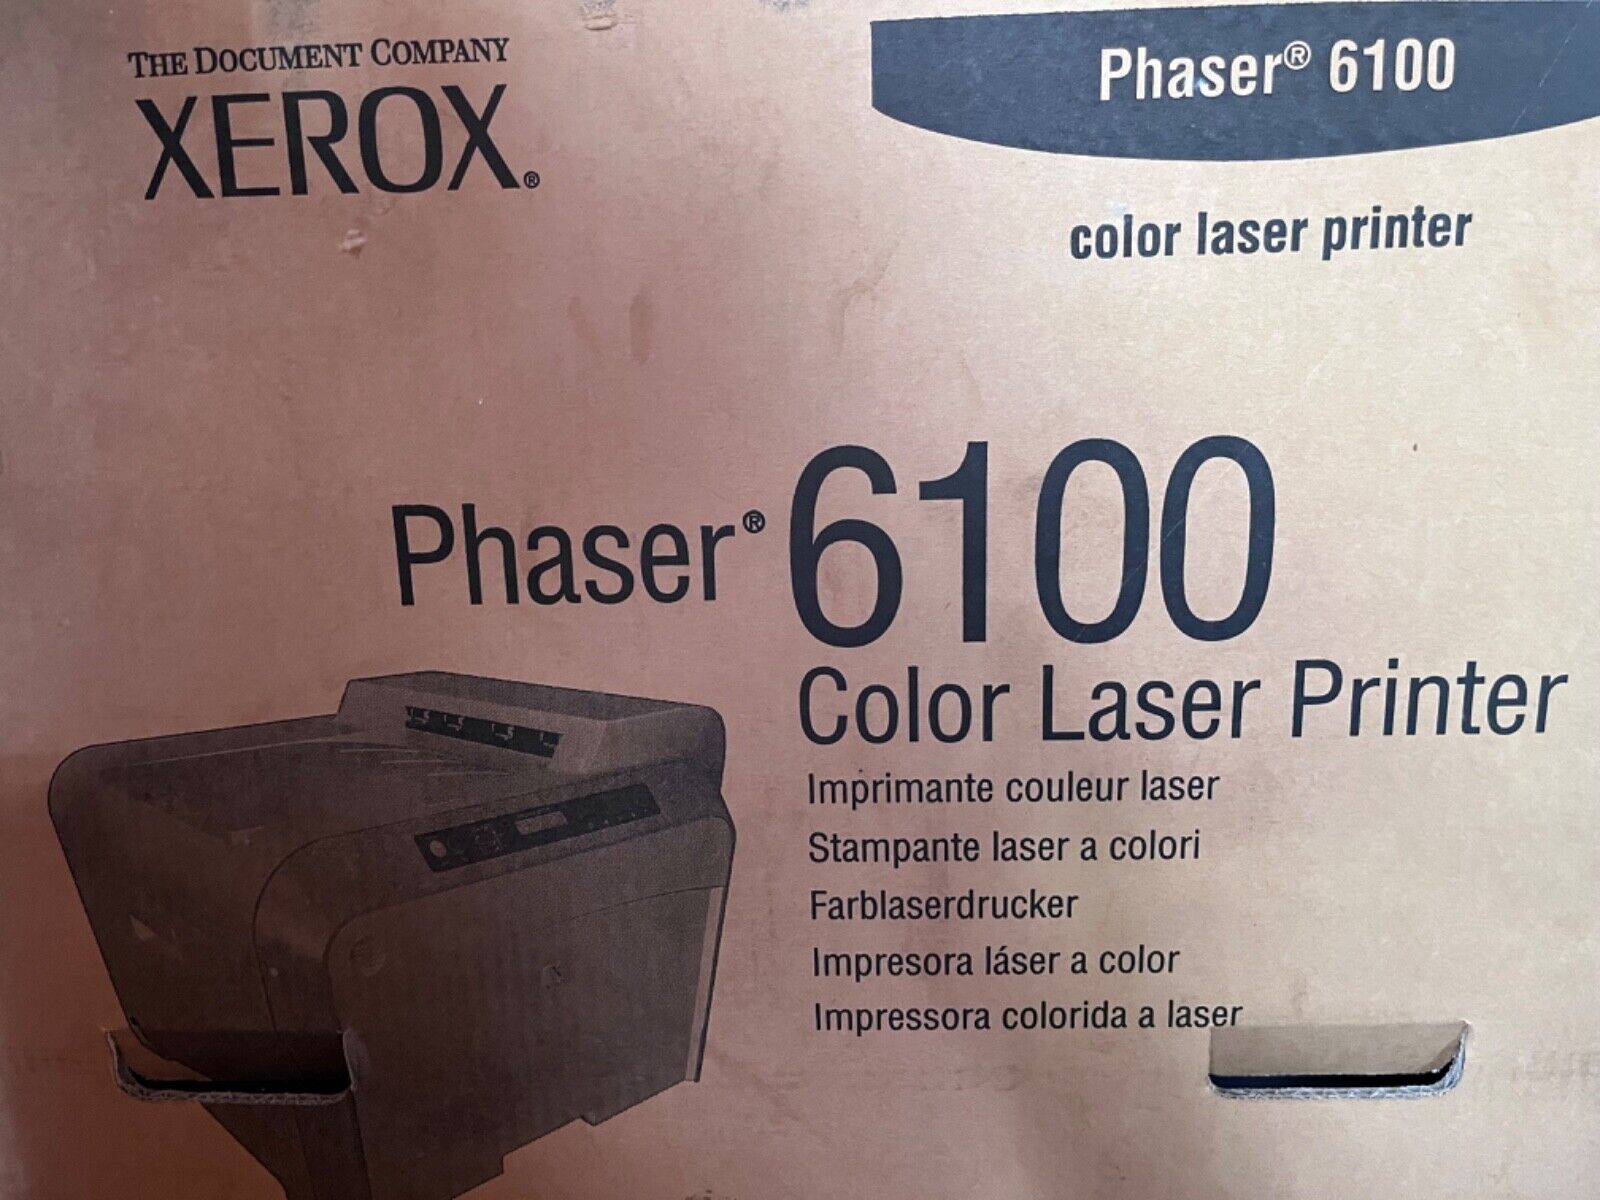 Xerox Phaser 6100 Workgroup Color Laser PrinterXerox Phaser 6100 Workgroup Color